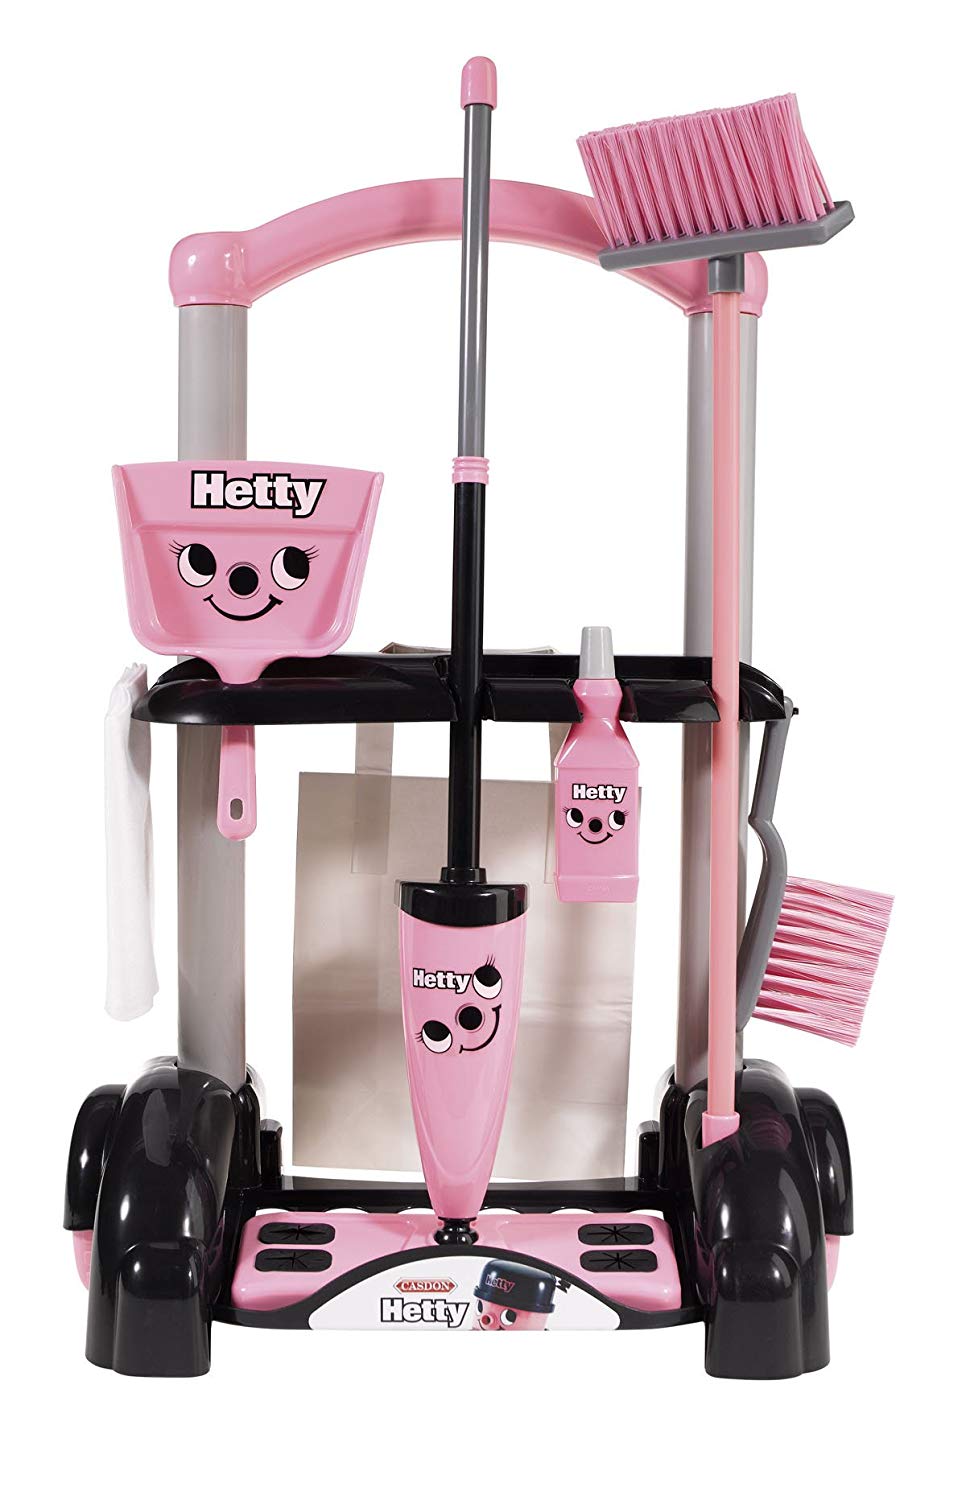 Details about   Casdon Pink Girls Mini Vacuum Cleaner Hoover Sucks Cleans Role Play Shovel Brush 